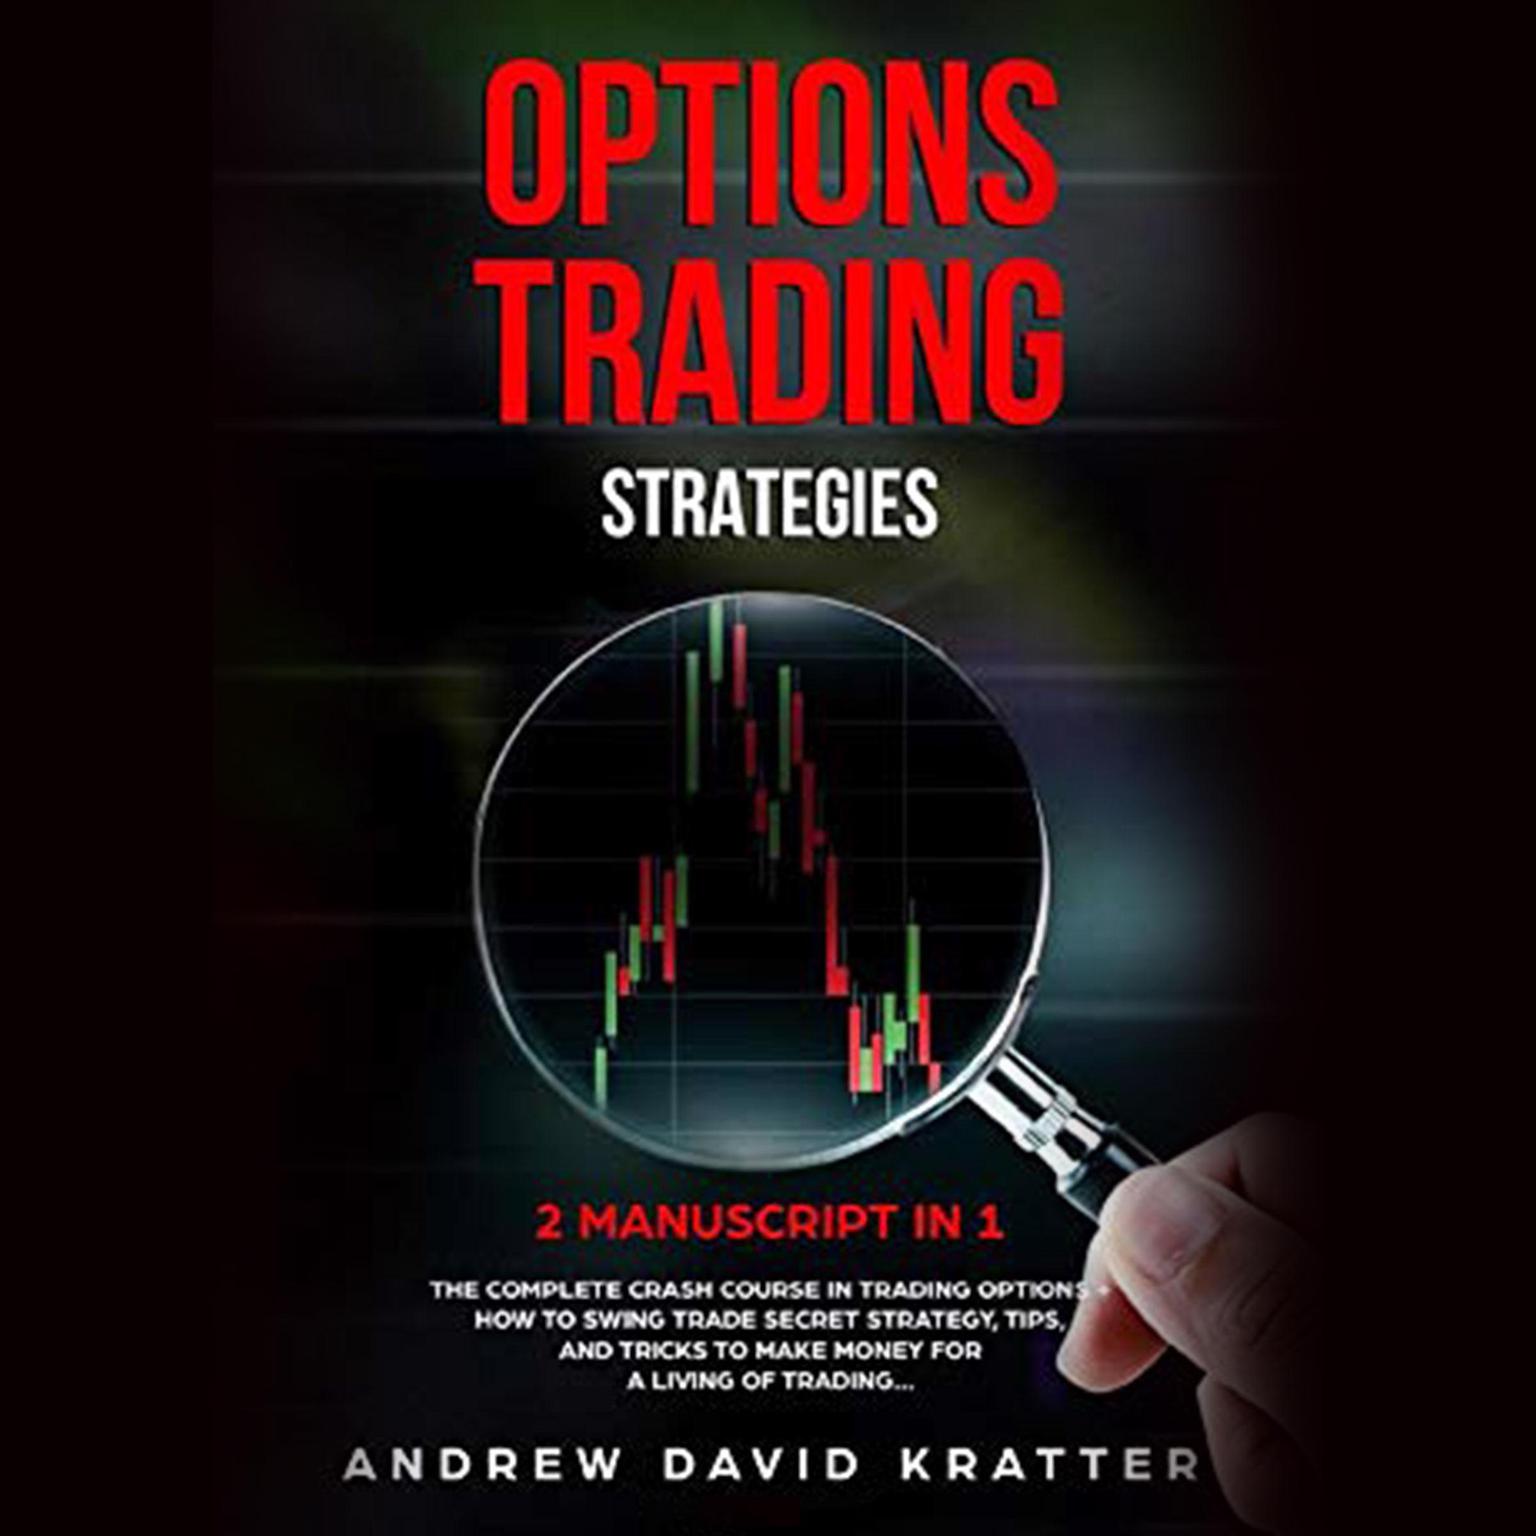 Options Trading Strategies:: 2 Manuscript in 1: The Complete Crash Course in Trading Options + How To Swing Trade Secret Startegy, Tips and Tricks to Make Money for a Living of Trading (Abridged): 2 Manuscript in 1: The Complete Crash Course in Trading Options + How To Swing Trade Secret Startegy, Tips and Tricks to Make Money for a Living of Trading Audiobook, by Andrew David Kratter